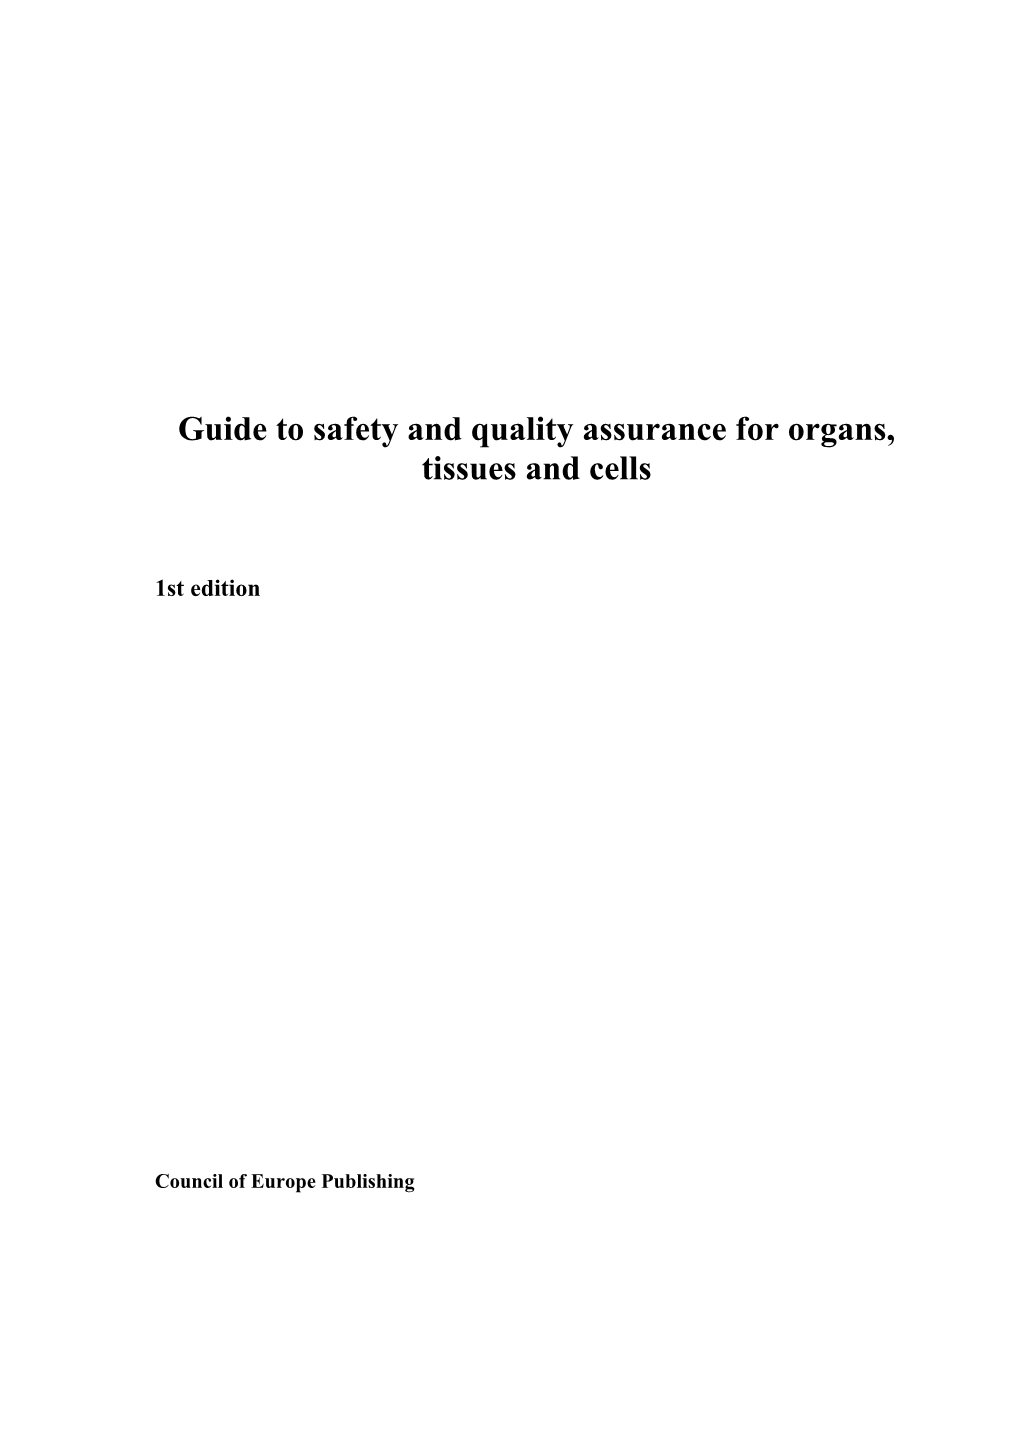 Guide to Safety and Quality Assurance for Organs